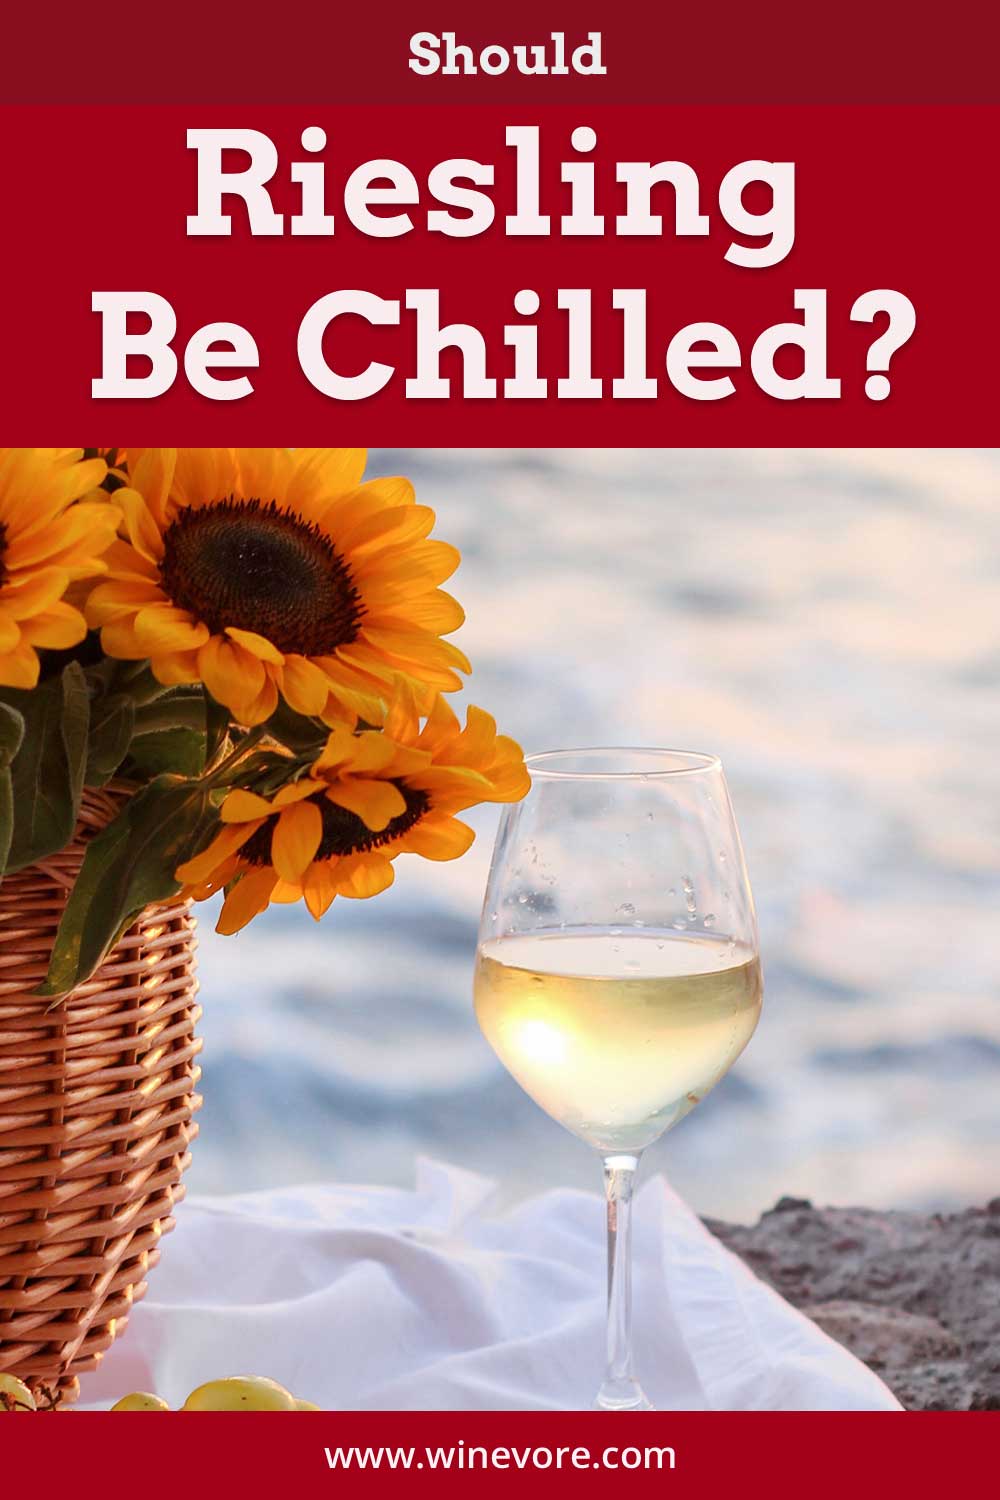 Wine glass on a white cloth near a basket with sunflowers in it - Should Riesling Be Chilled?